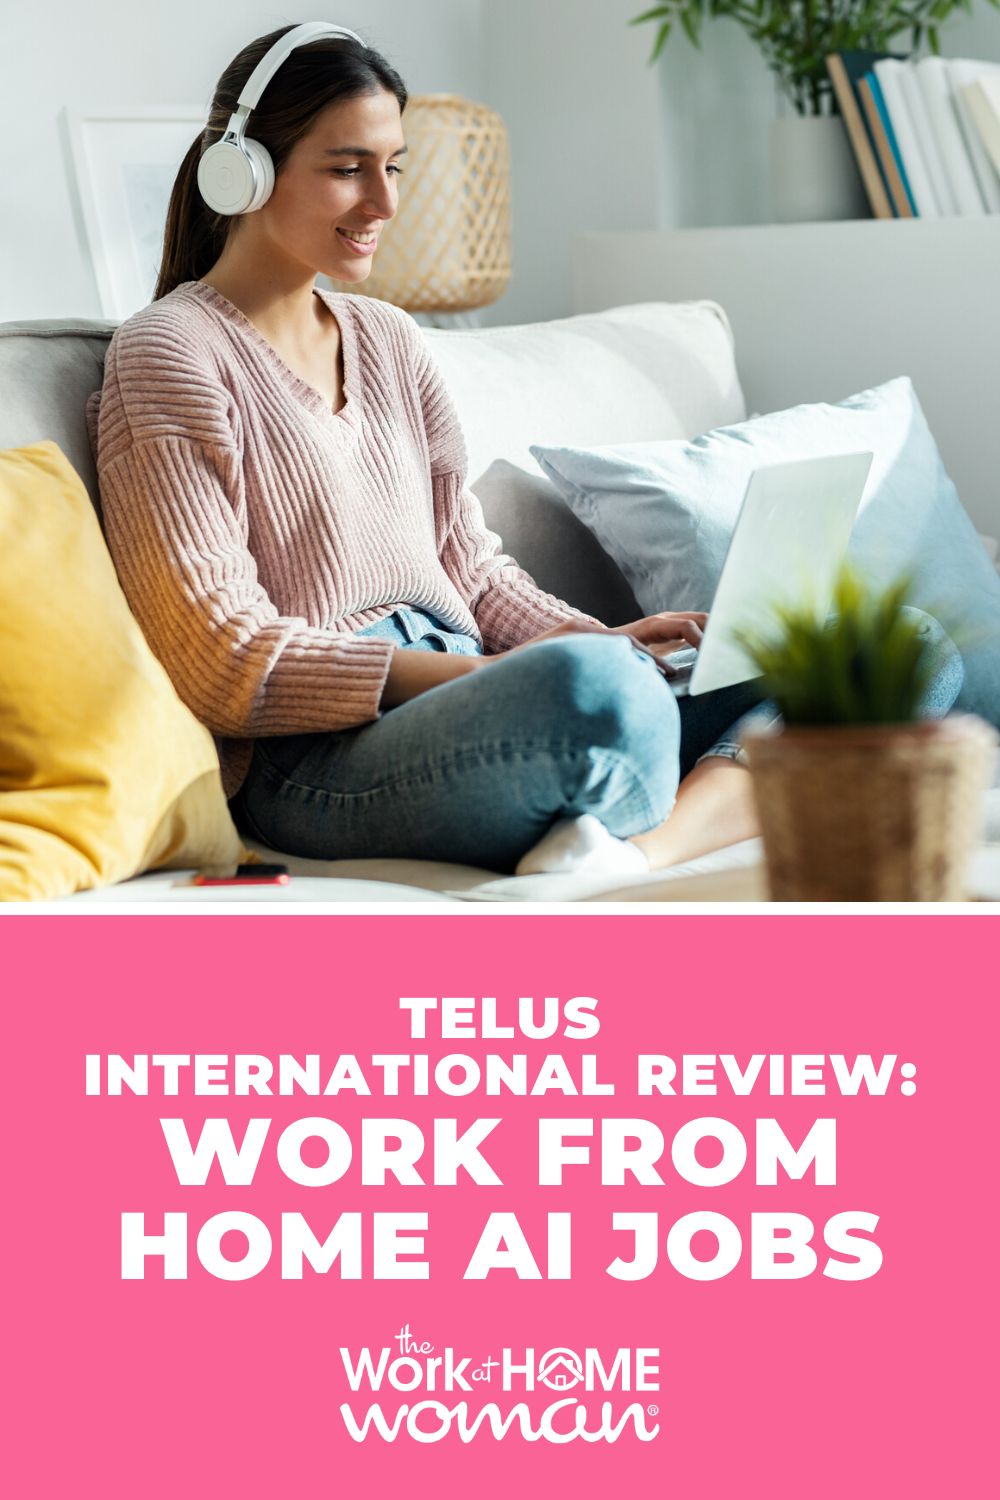 In this TELUS International review, we’ll discuss their online job opportunities, including requirements, compensation, and pros and cons.